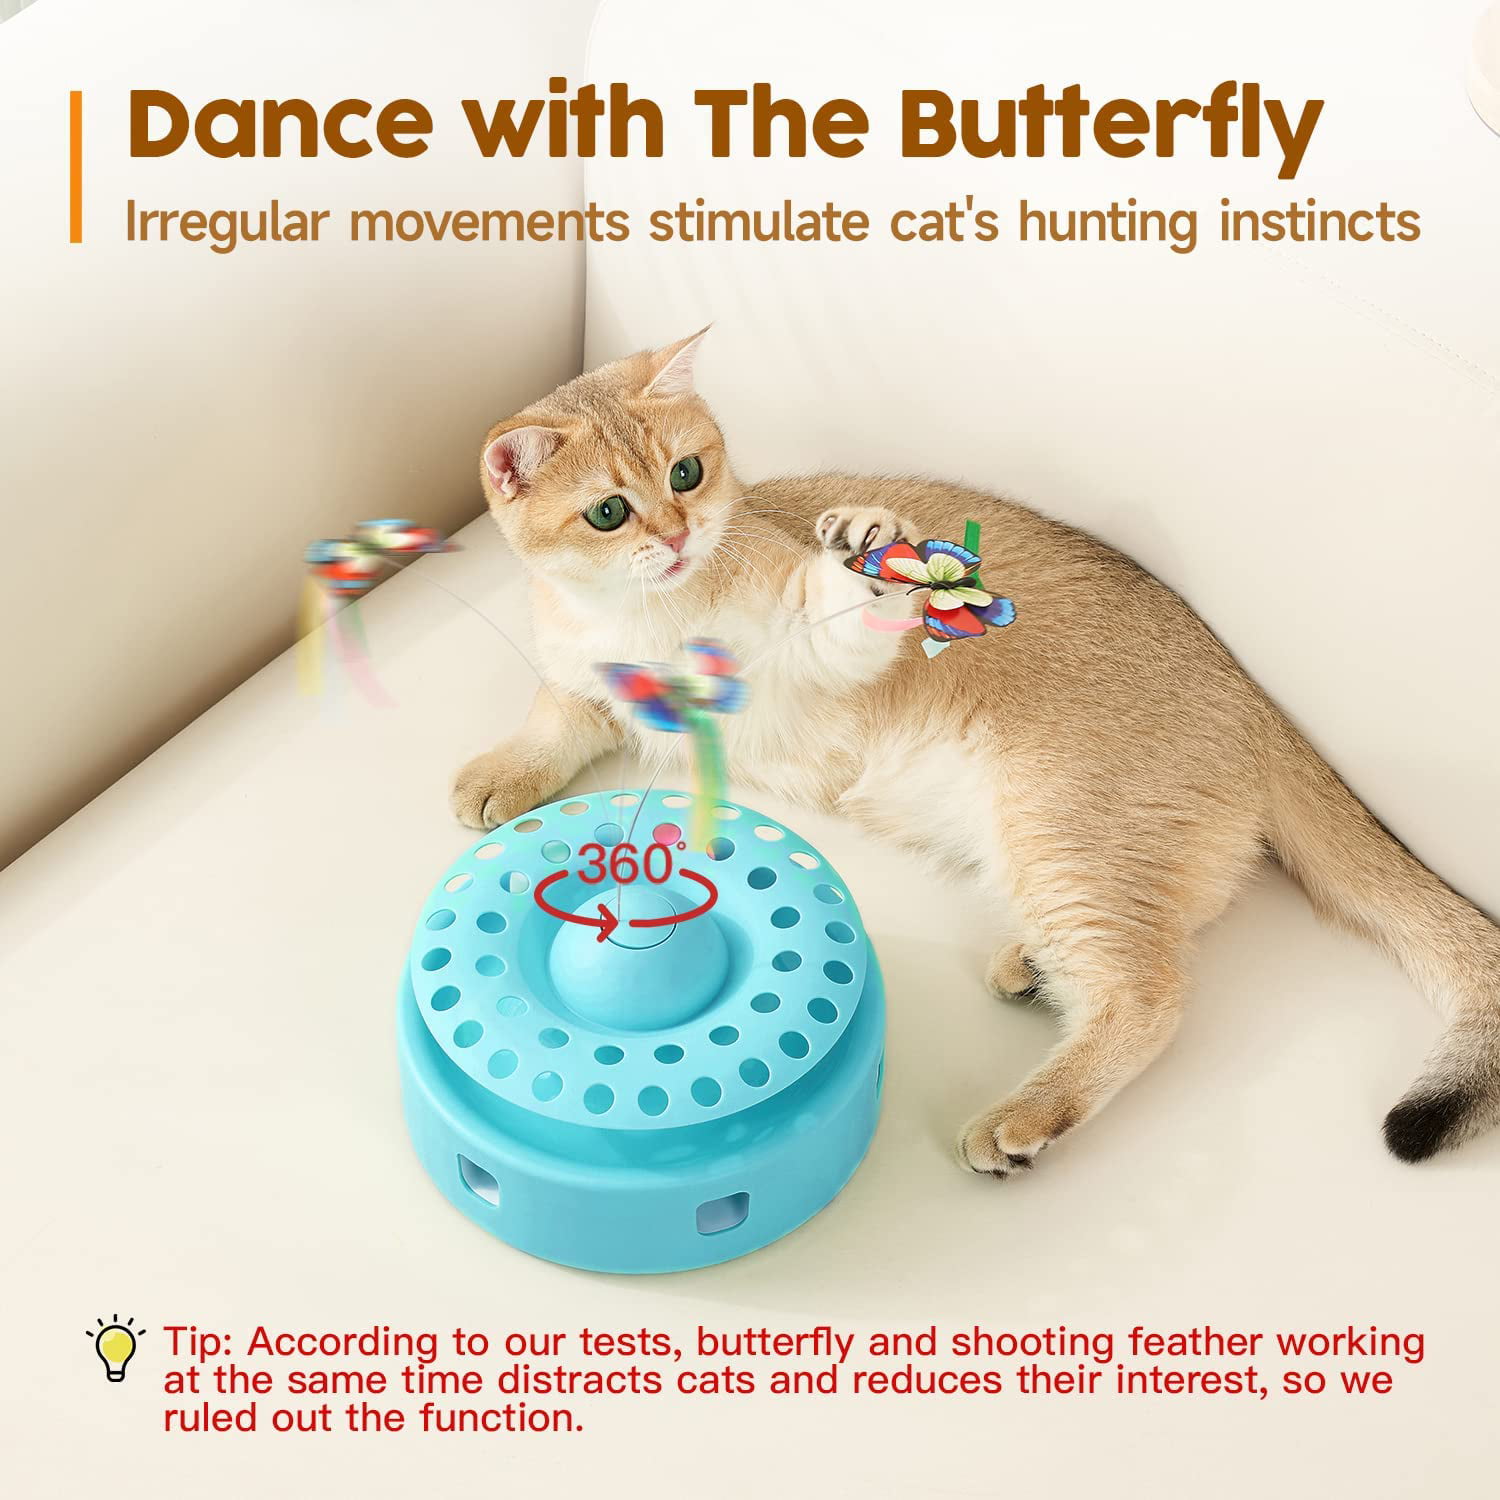  4 in 1 Cat Toy Indoor for Cats Interactive Best Kitten Puzzle  Toys Seller Kitty Treasure Chest Puzzles Smart stimulating Mental  Stimulation Brain Games Track Balls Teaser Catnip Ball with